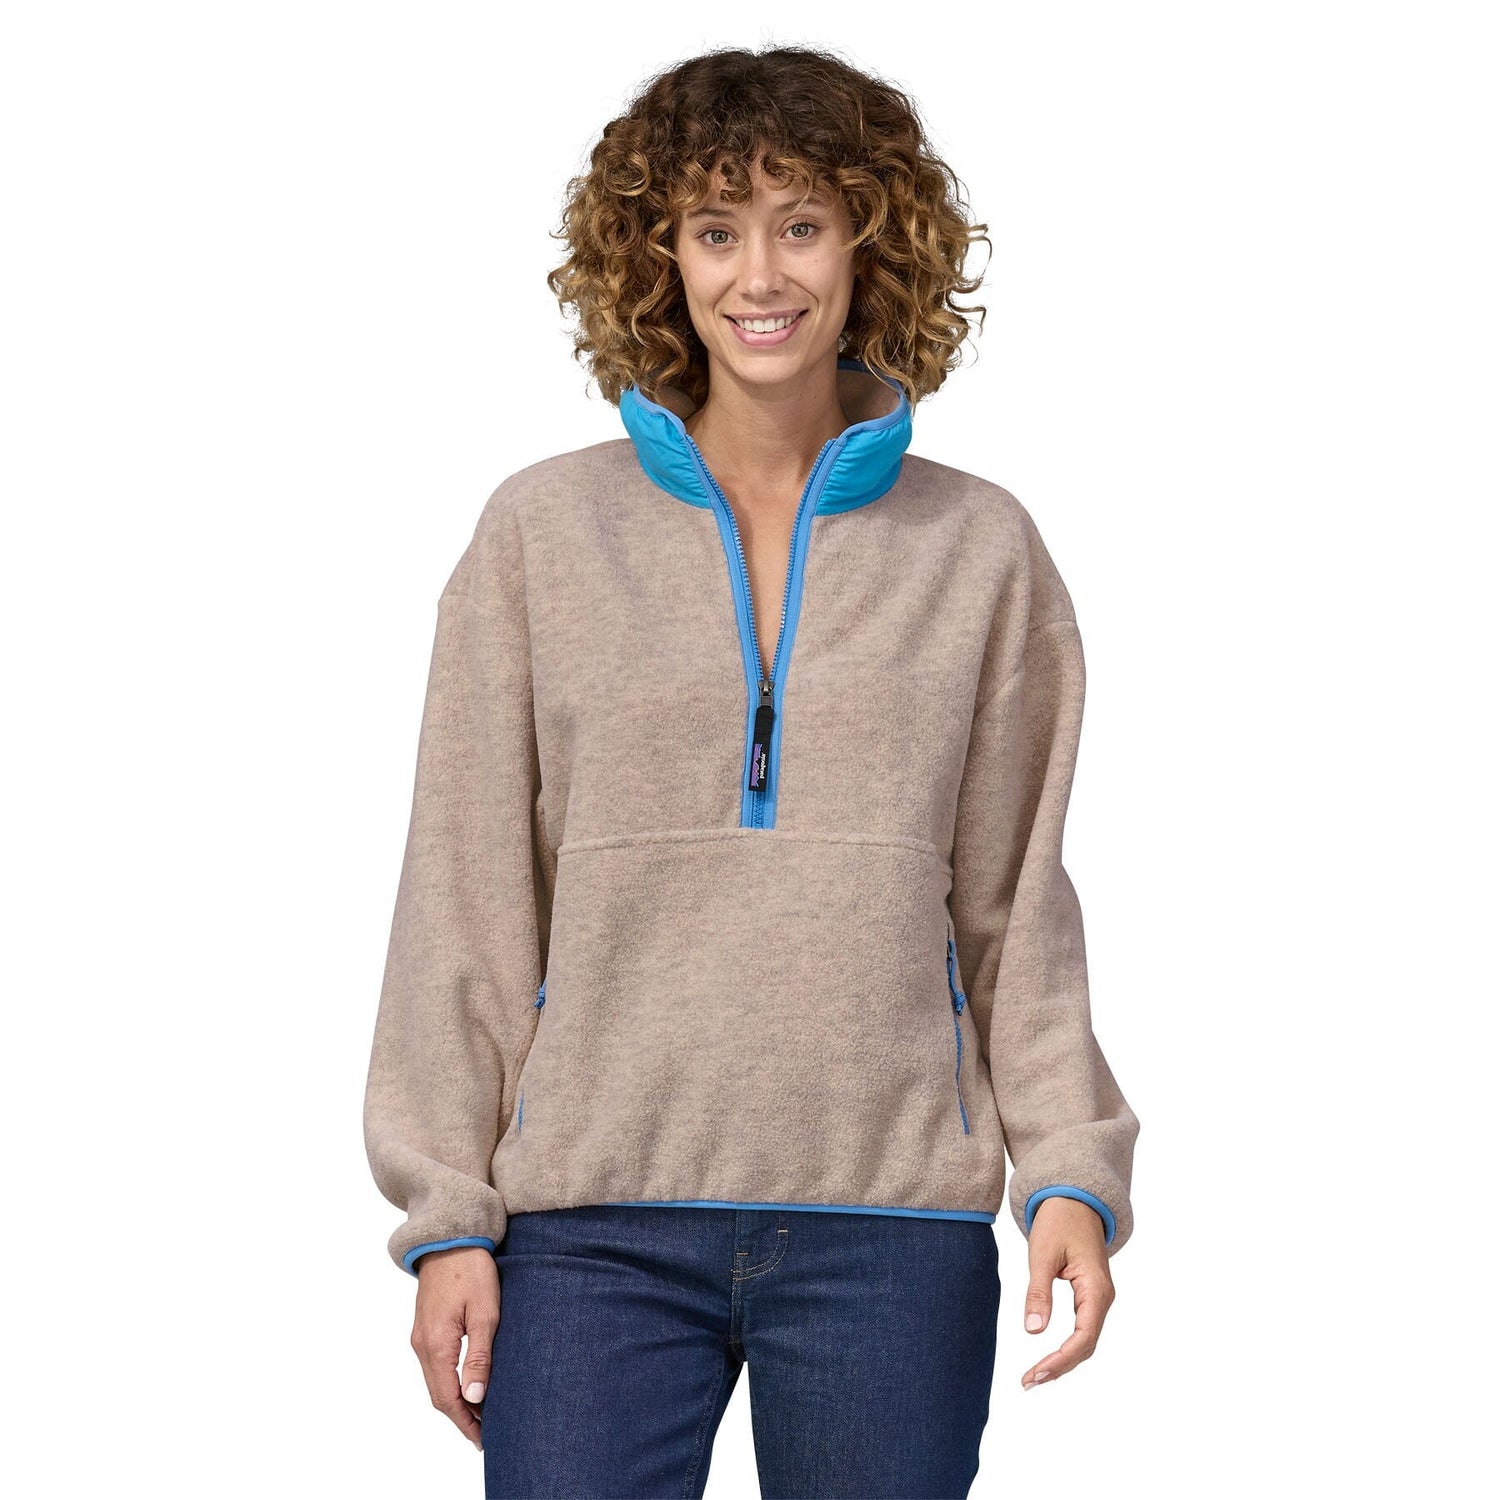 Patagonia W's Synch Fleece Marsupial - 100% Recycled Polyester Oatmeal Heather w/Blue Bird Shirt